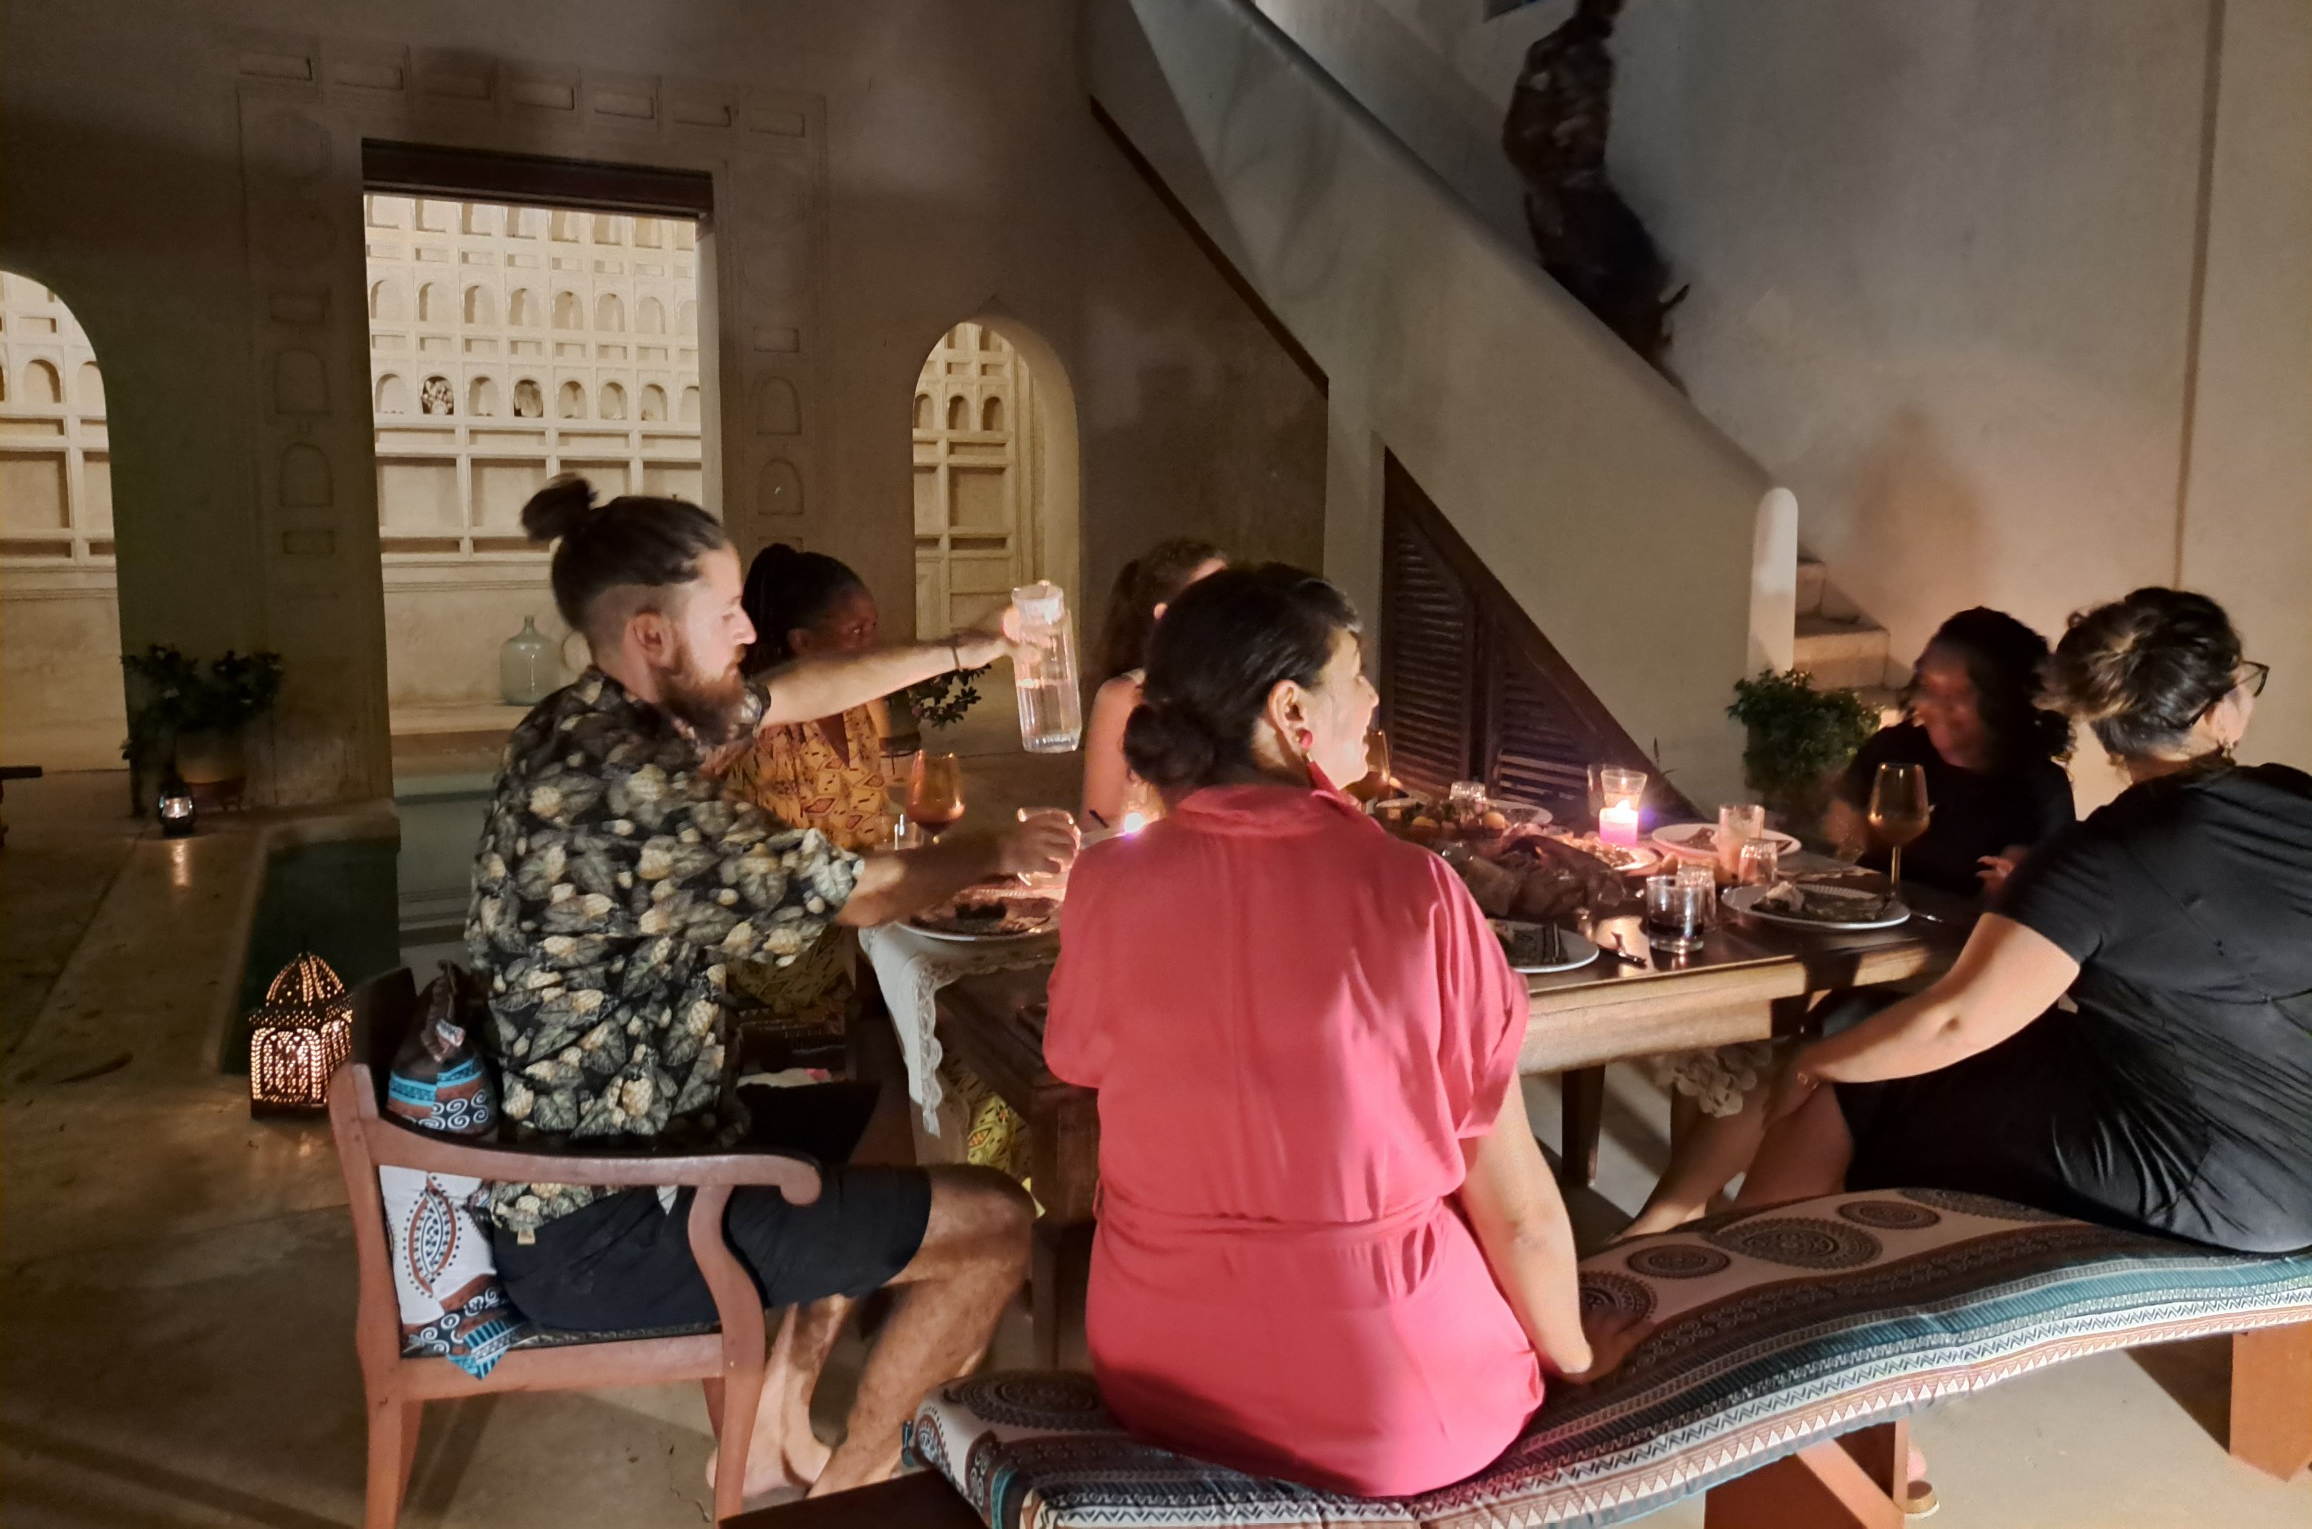 Remote Workers & Digital Nomads in an AfricaNomads Comunal Dinner